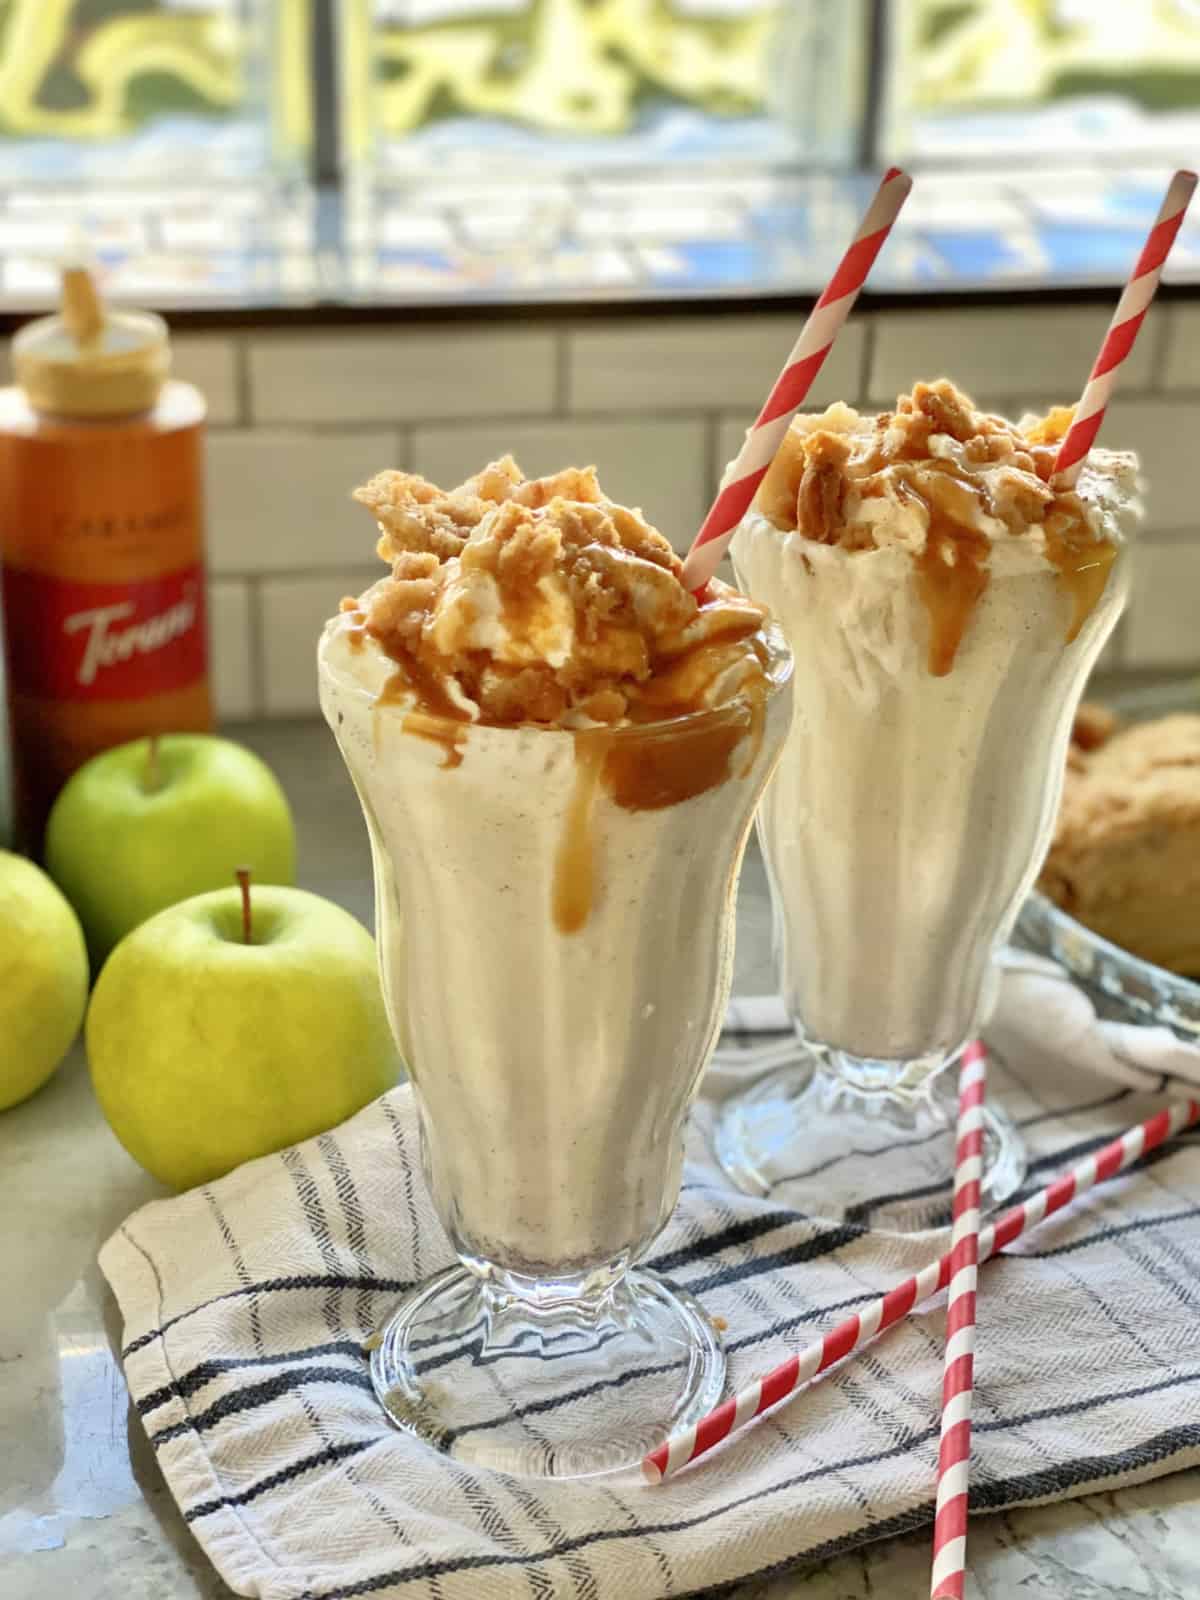 Two tall glasses filled with milkshakes topped with caramel sauce.